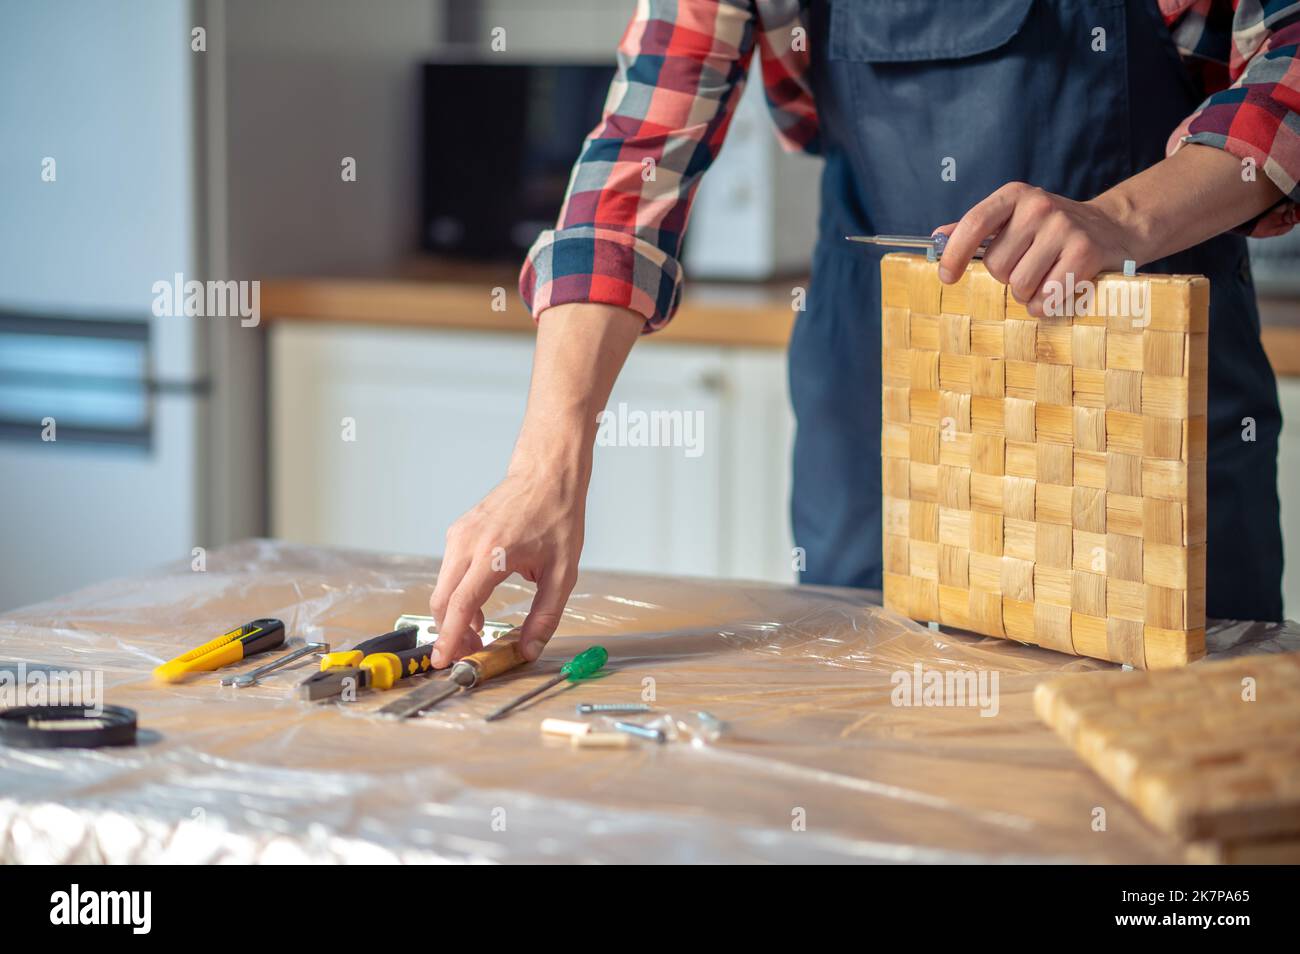 Experienced woodworker choosing a carpentry tool for work Stock Photo